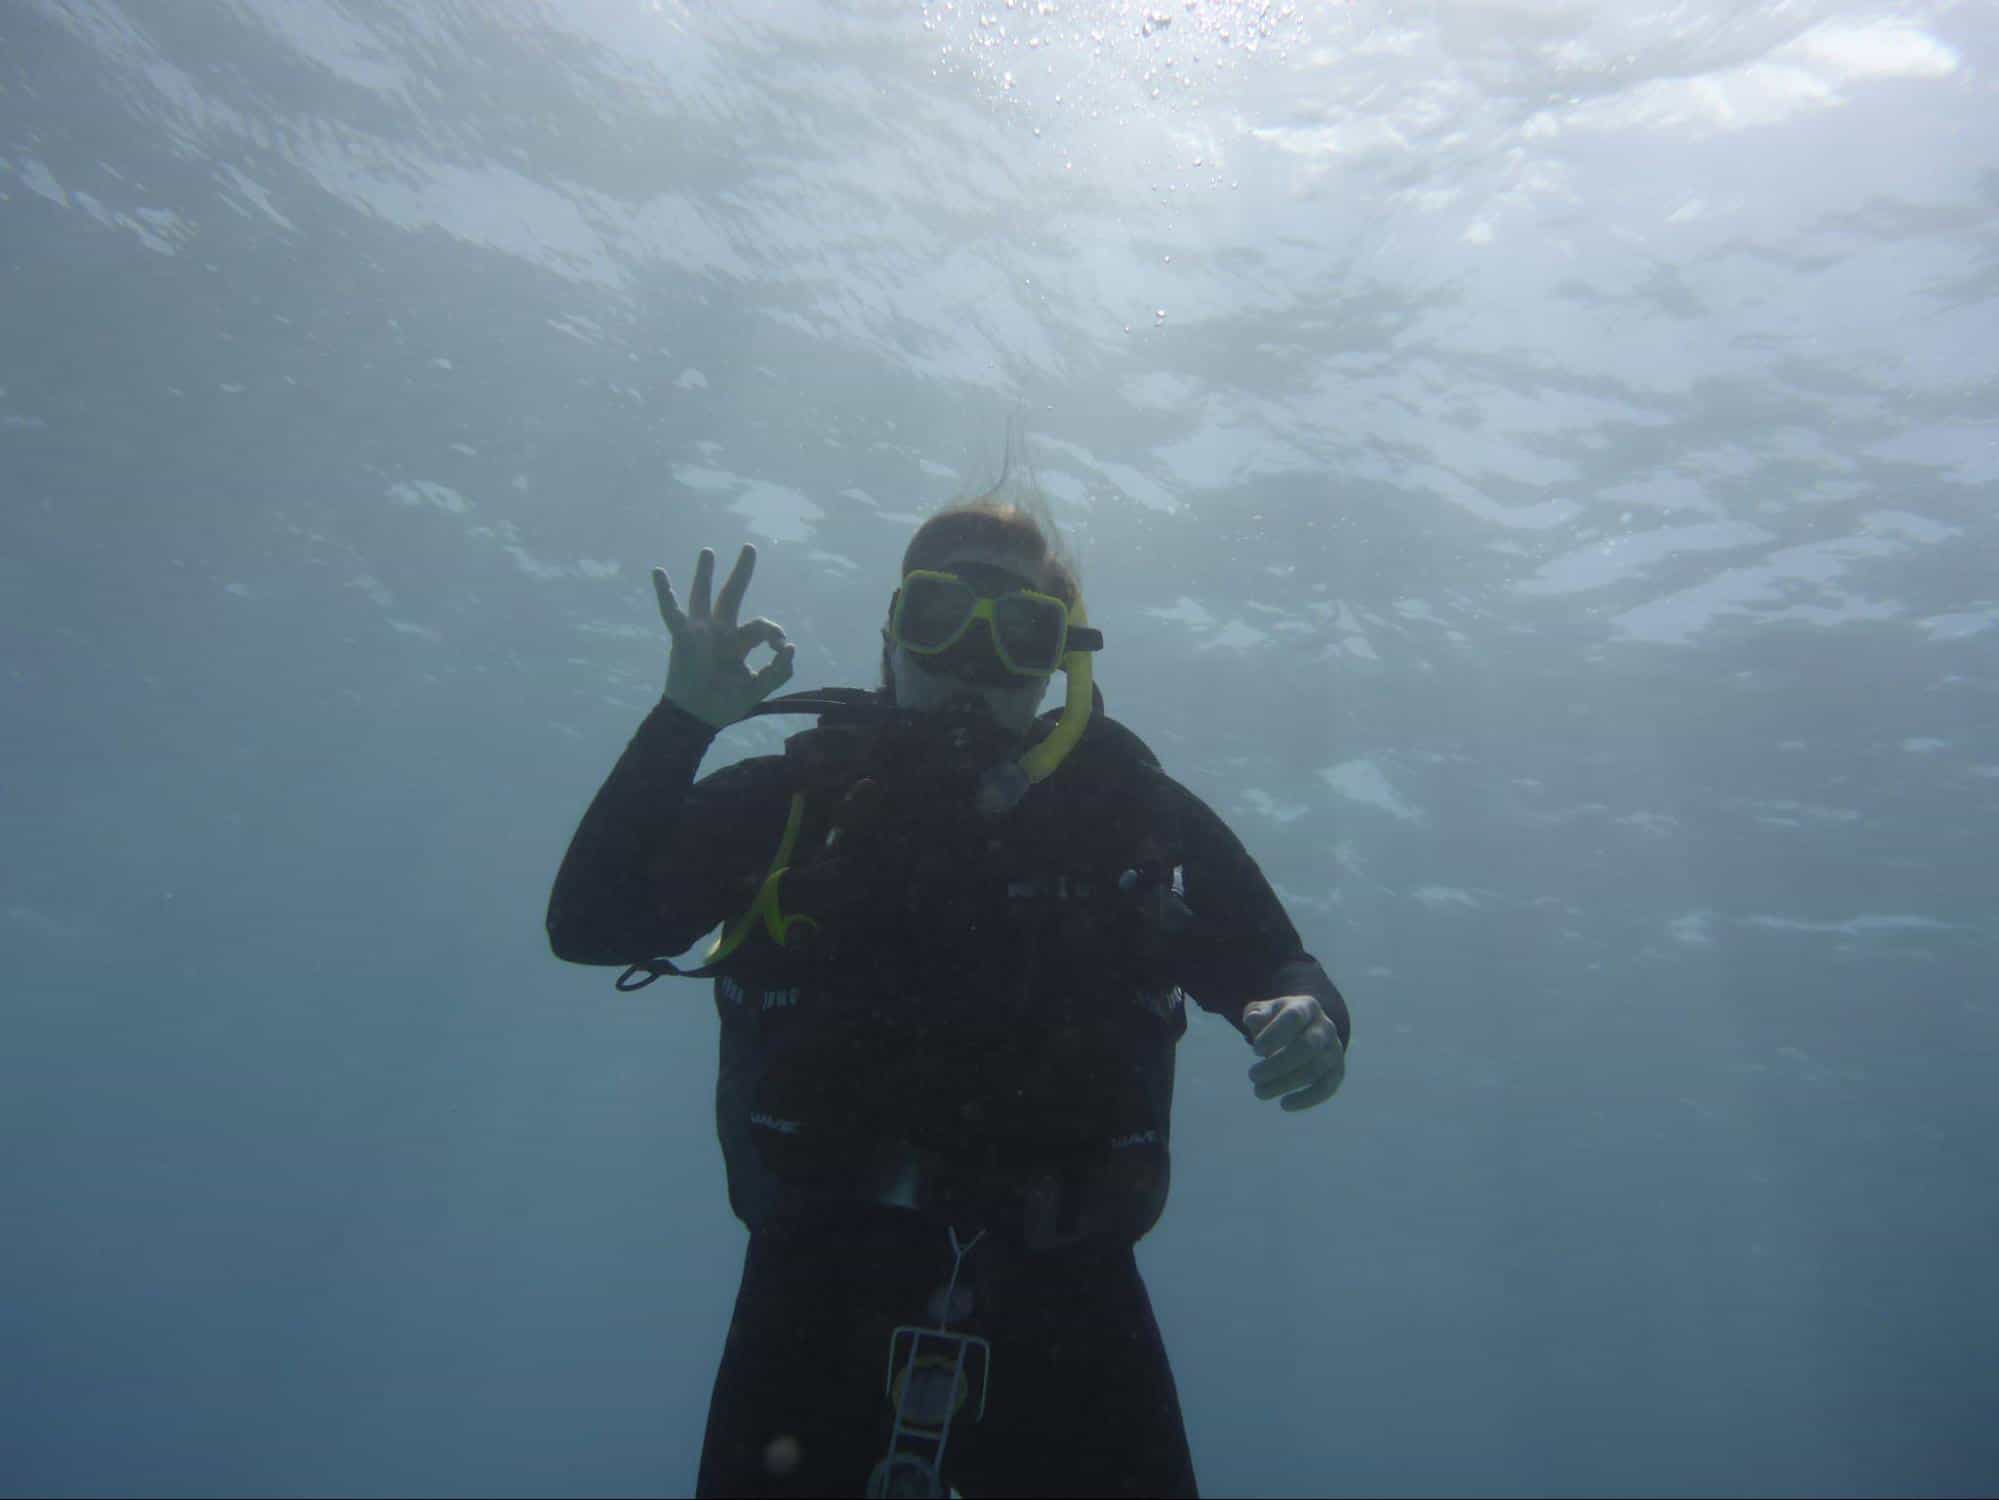 Julie scuba diving and holding up an OK sign